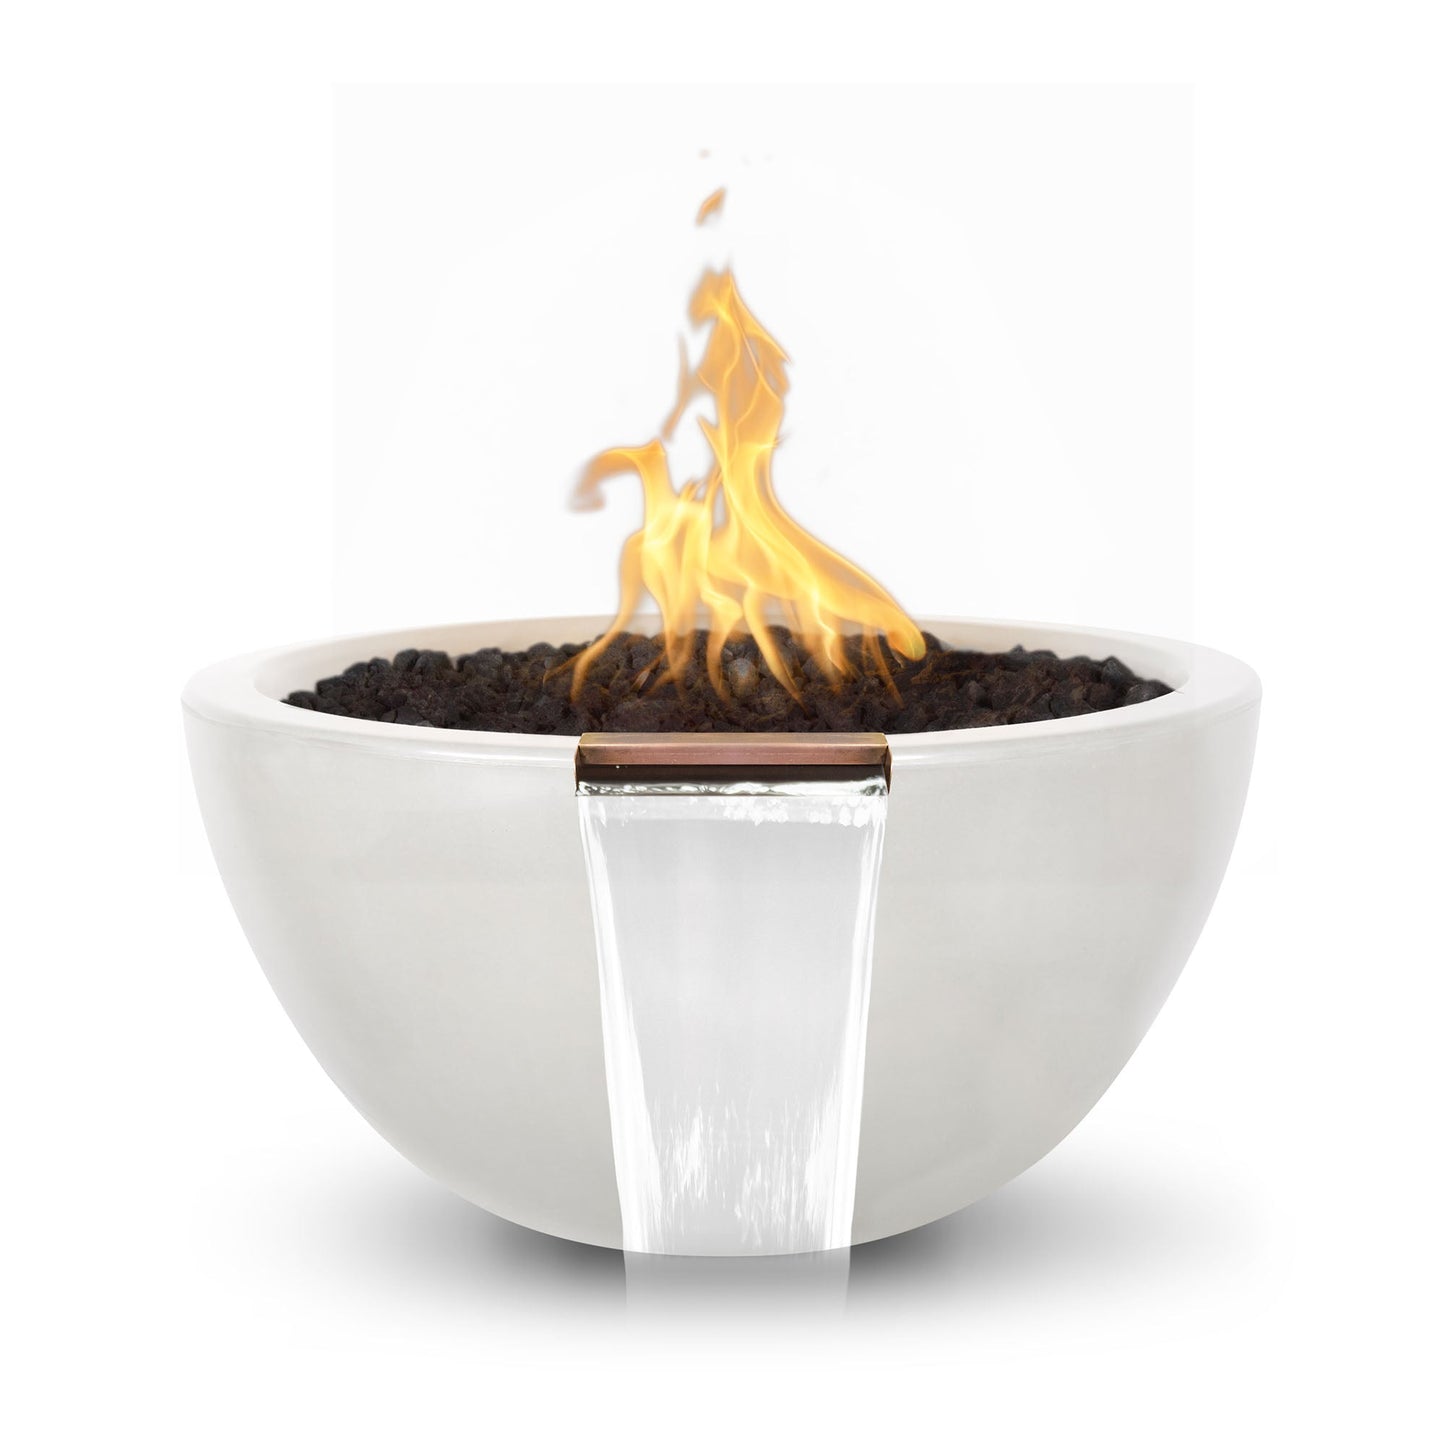 The Outdoor Plus Round Luna 38" White GFRC Concrete Liquid Propane Fire & Water Bowl with Match Lit with Flame Sense Ignition